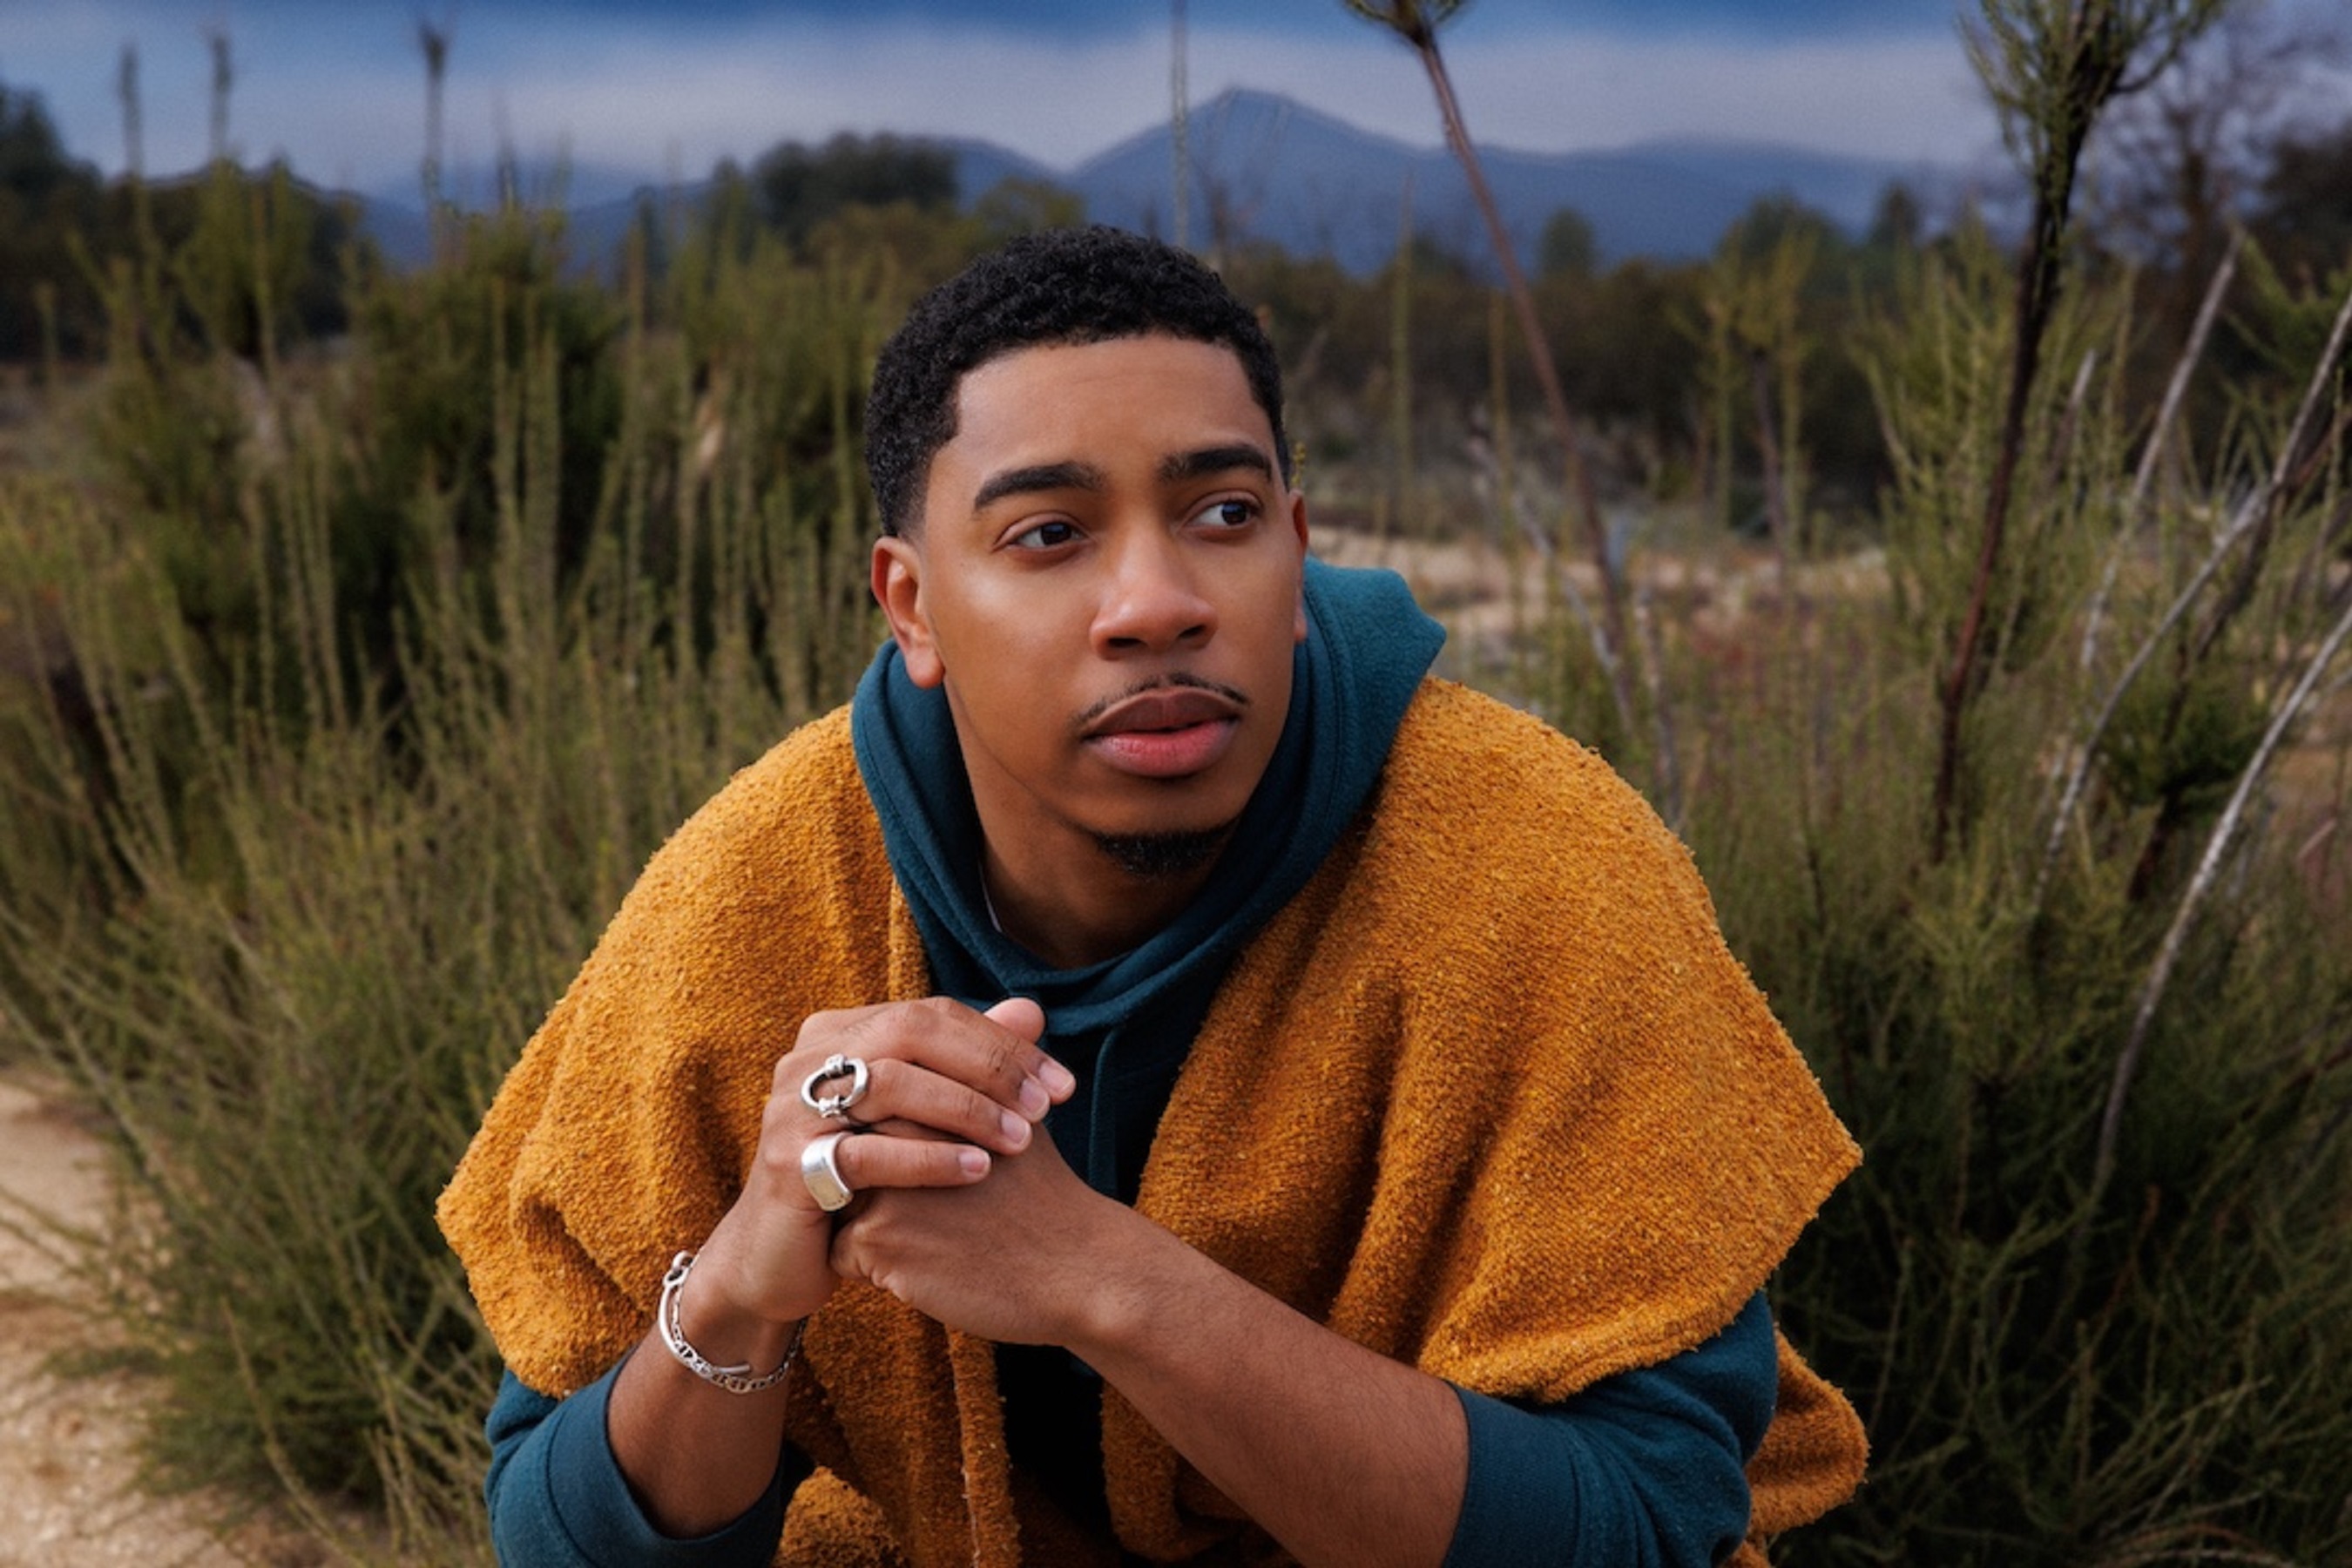 Christian Sands Announces New Album 'Embracing Dawn' + Releases First Single "MMC"